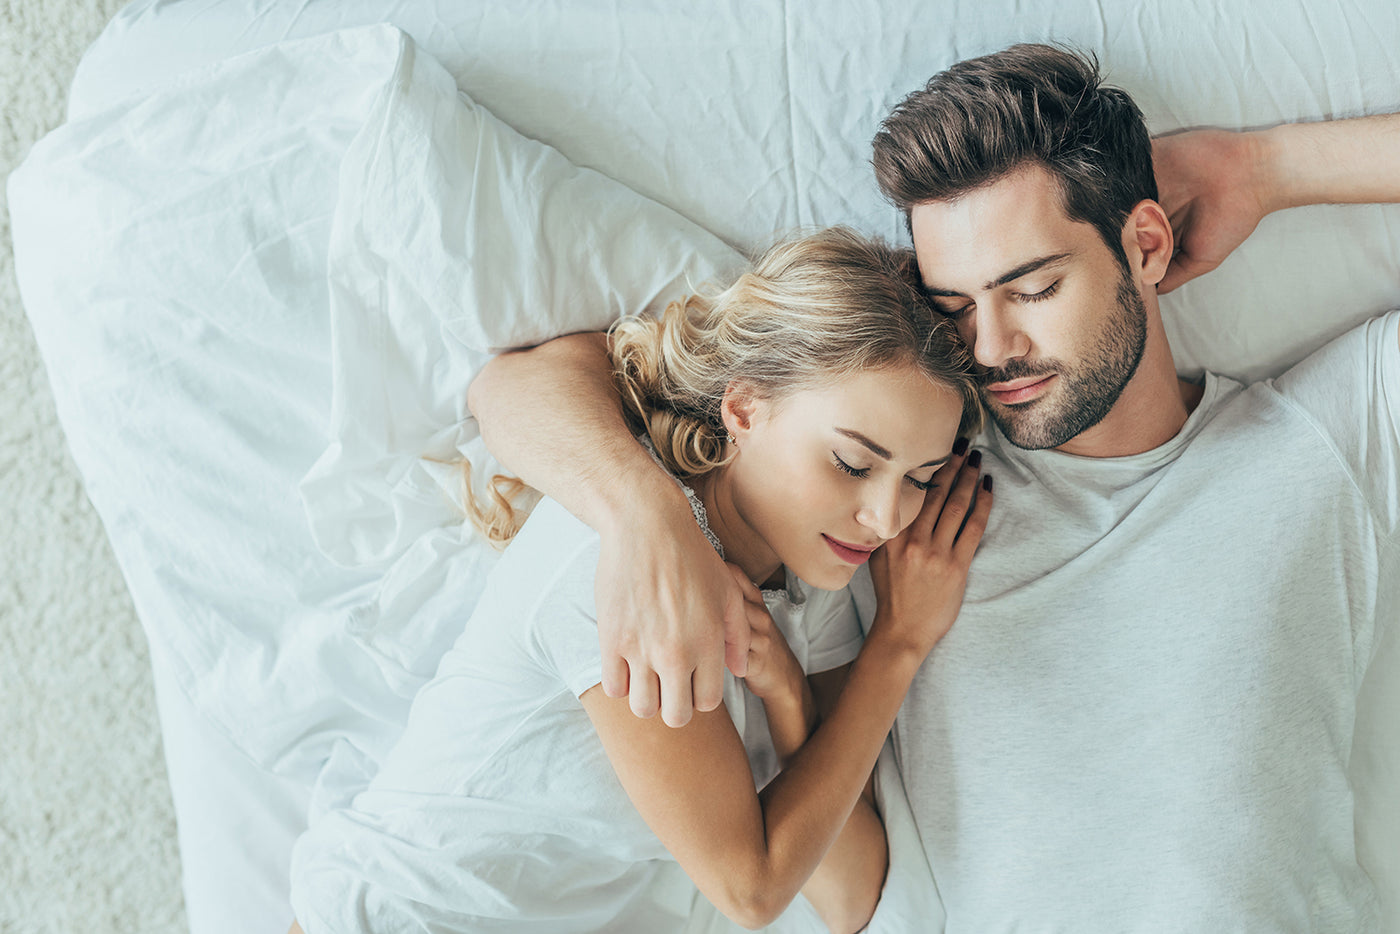 Couples' Sleeping Positions Reveals A Lot About Relationship